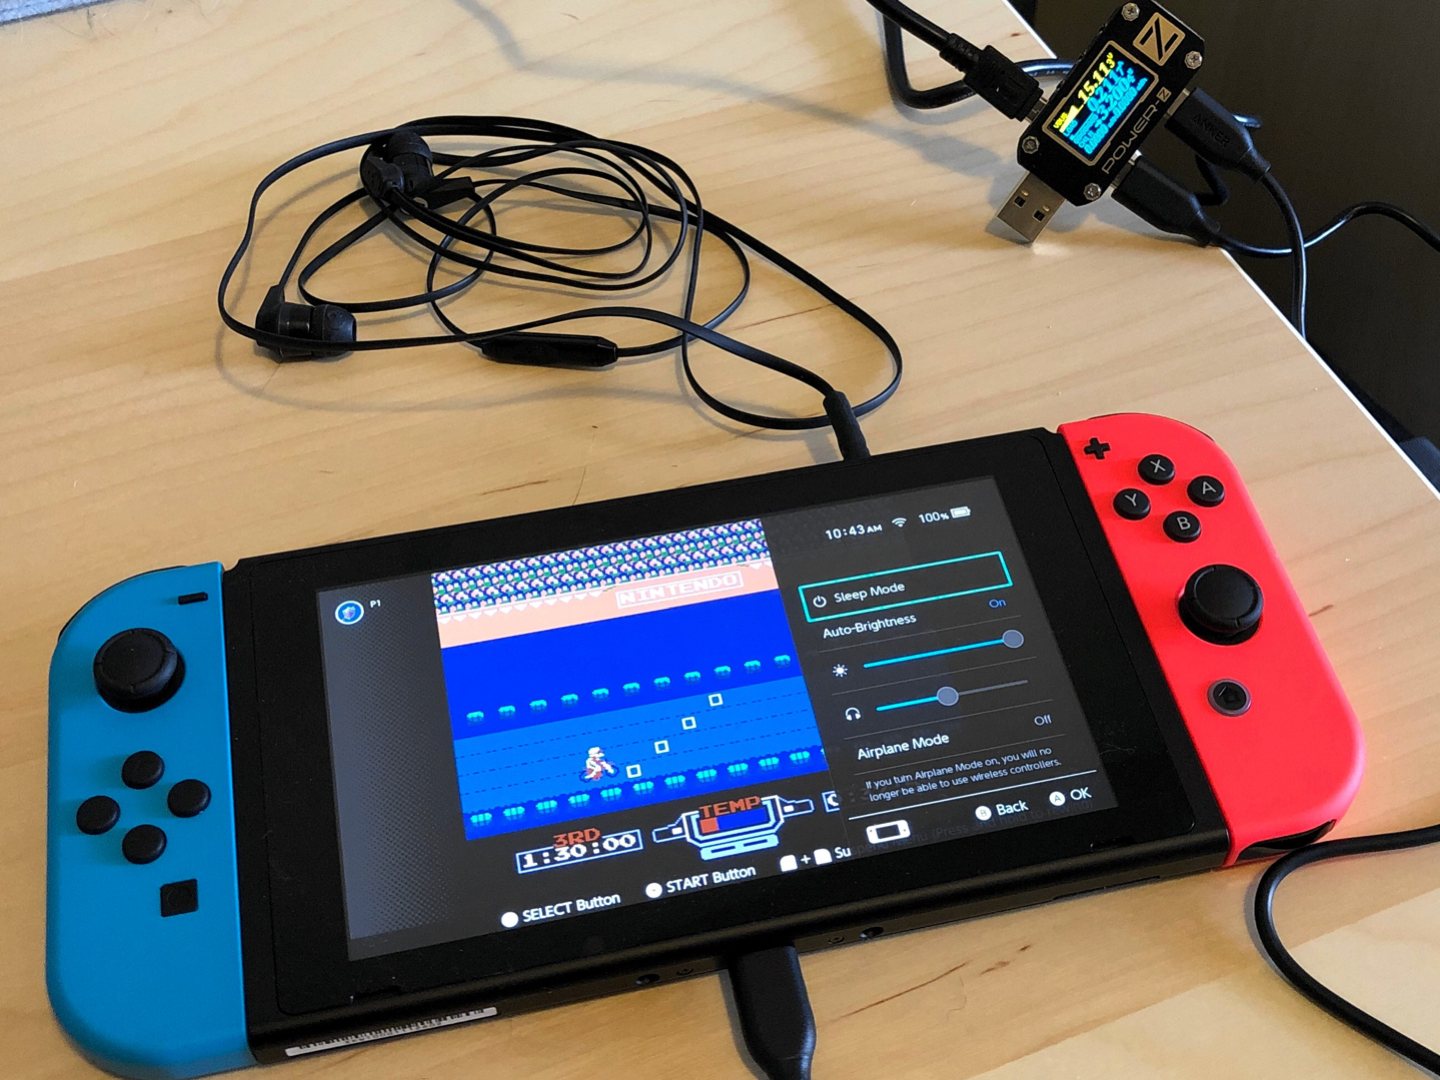 New Nintendo Switch under going low level power usage test